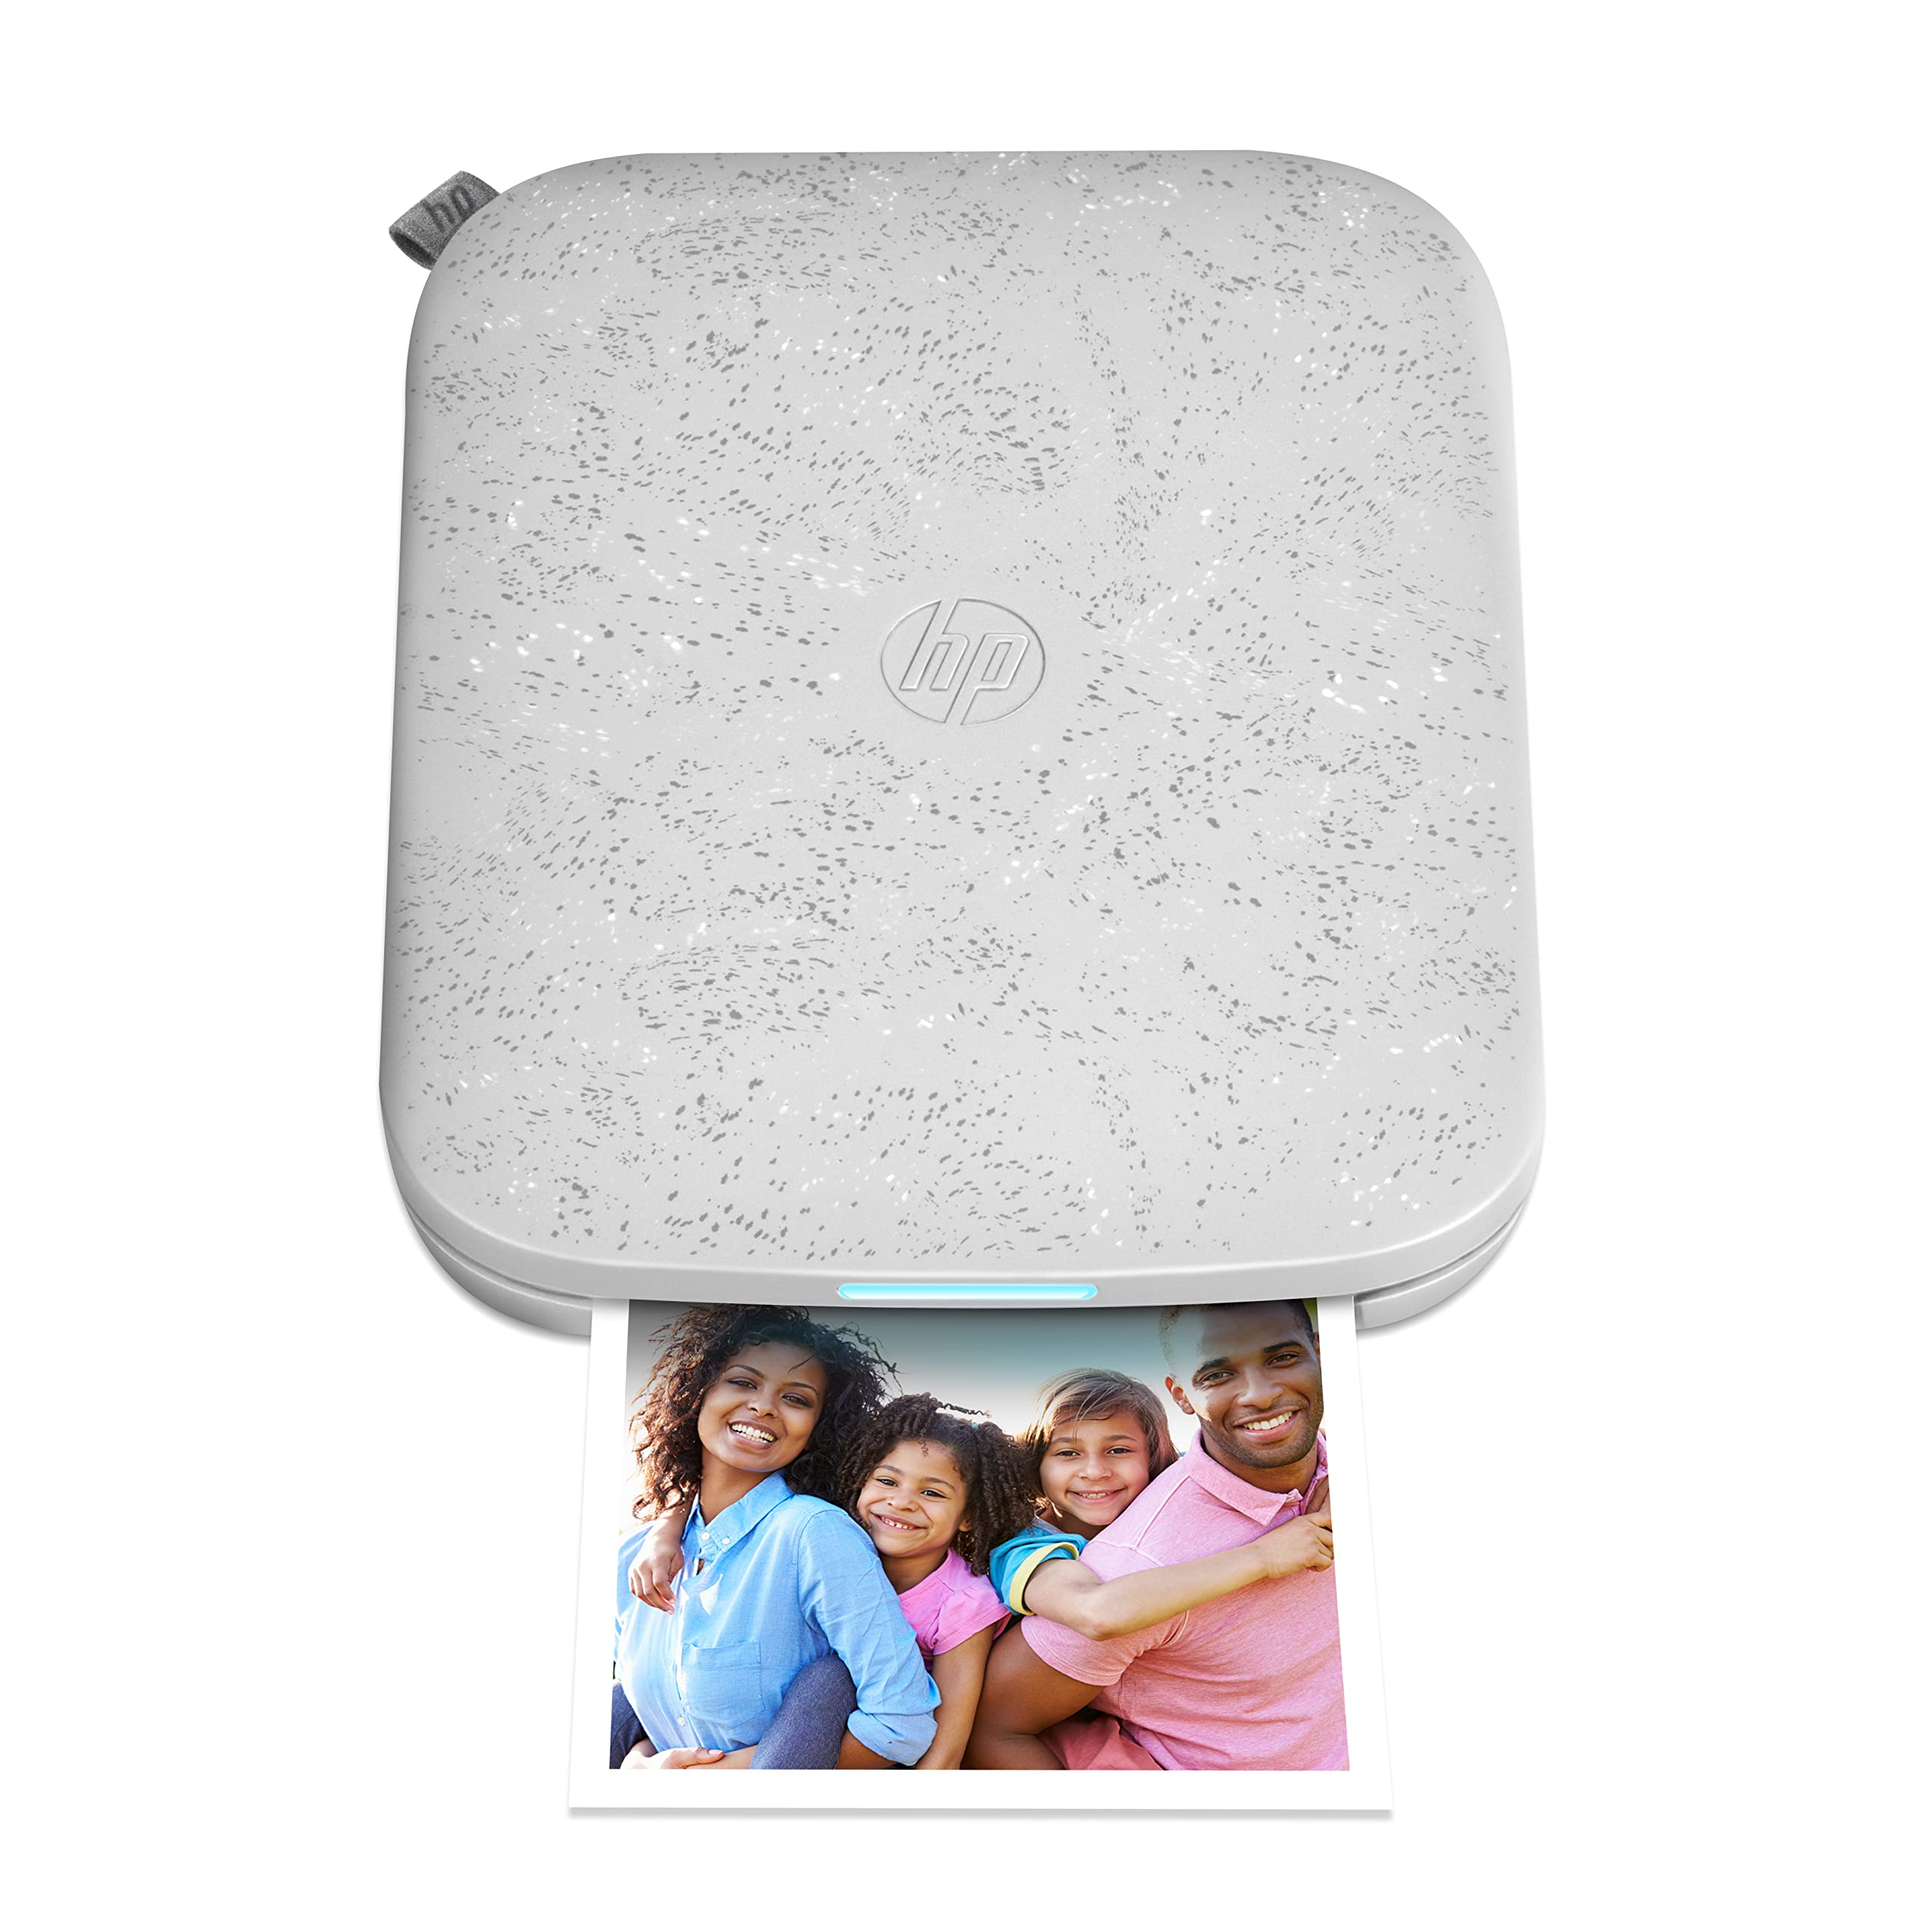 HP Sprocket 3x4 Instant Photo Printer – Wirelessly Print 3.5x4.25” Photos on Zink Paper from iOS & Android Devices